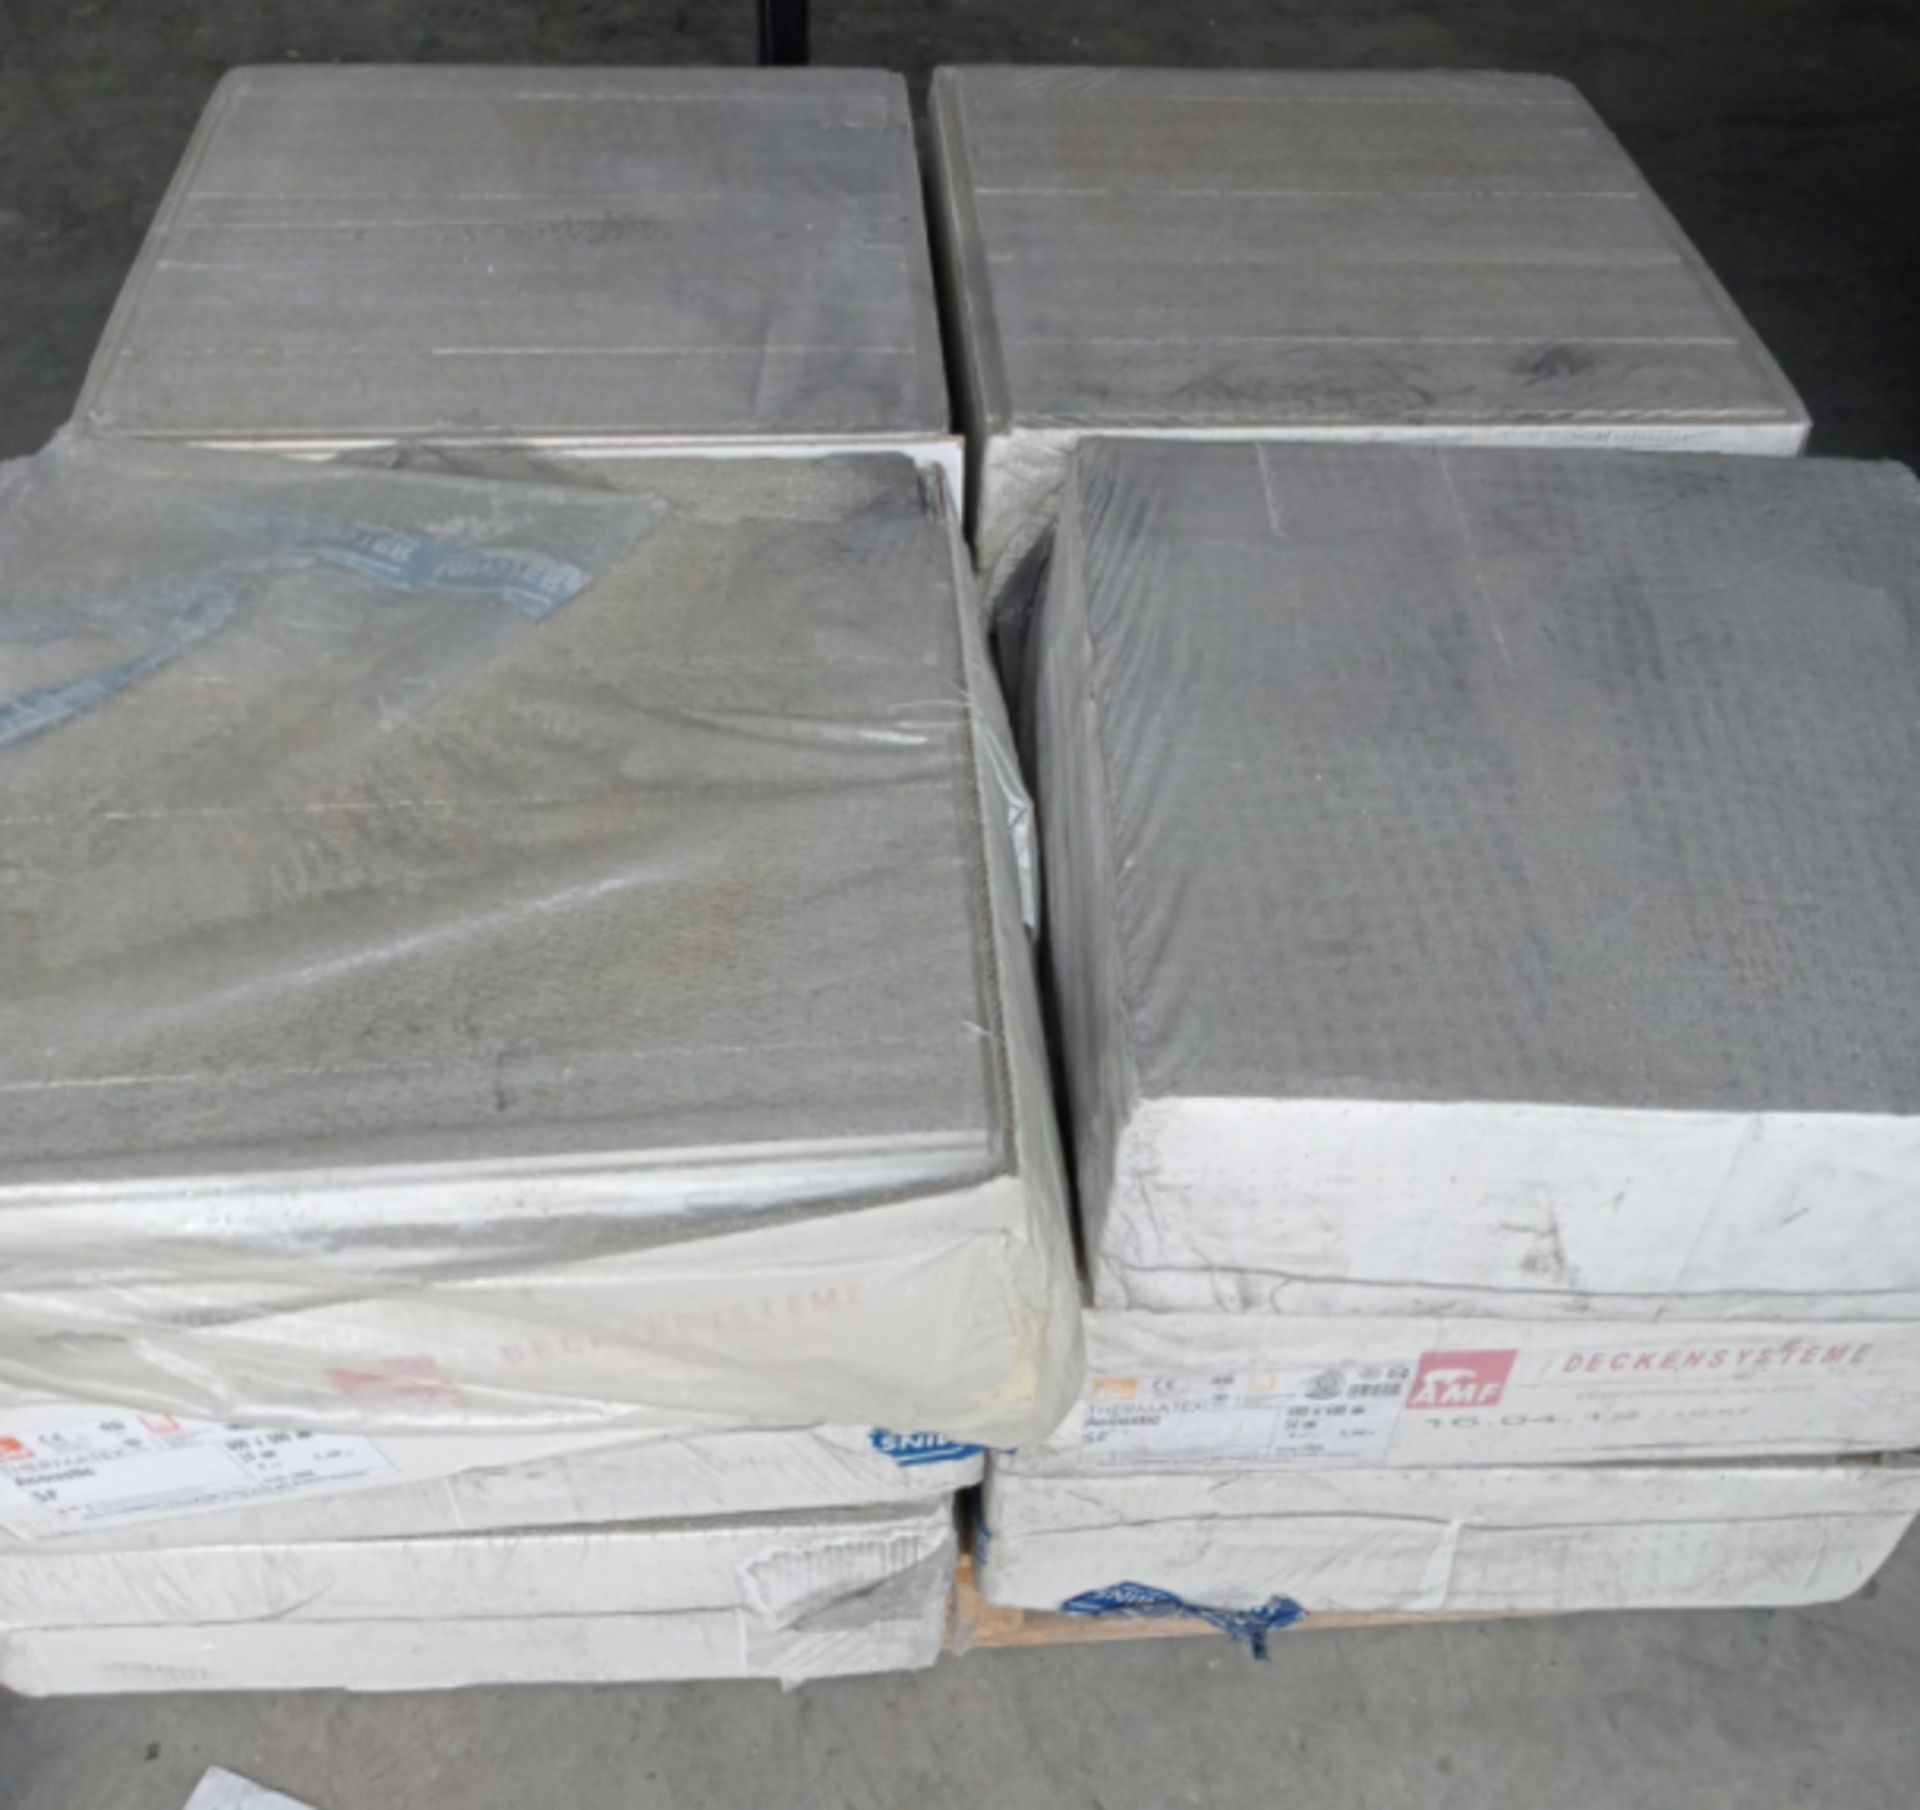 JOBLOT OF 12 BOXES THERMATEX SF ACOUSTIC CEILING TILES EDGE 600 X 600 X 24MM - GRADE B - Image 2 of 3